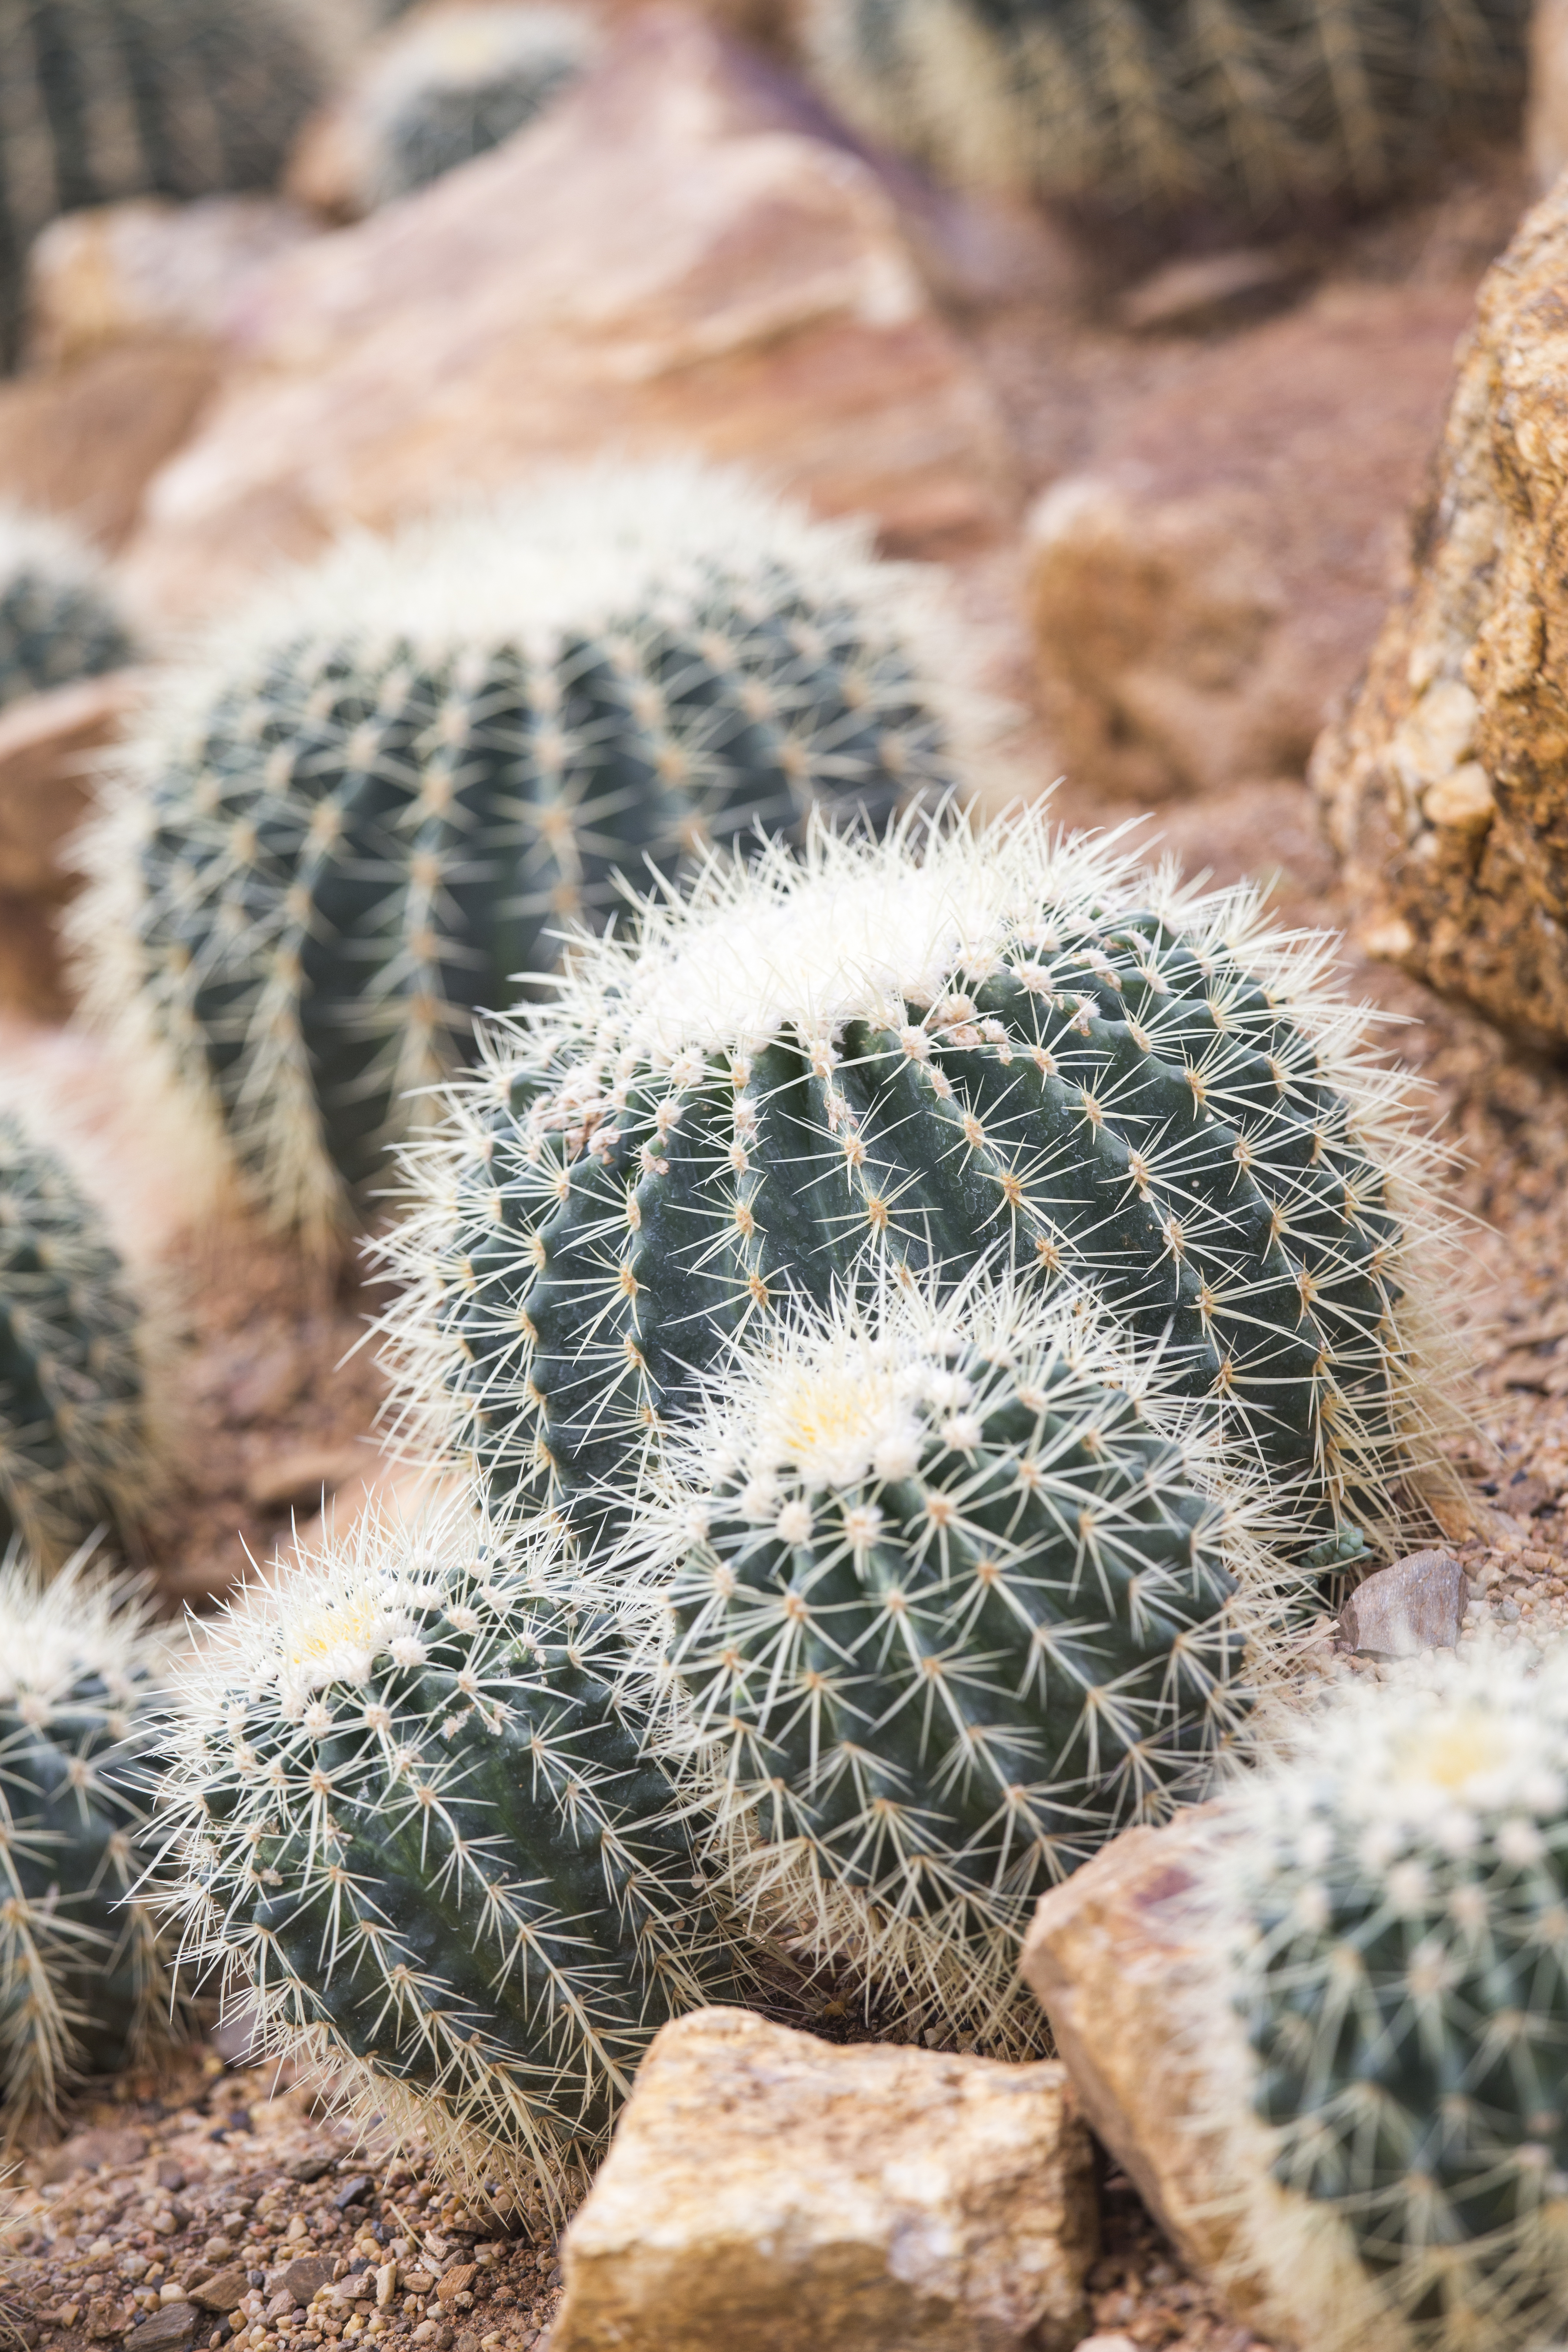 How to repot a cactus: experts reveal their top methods